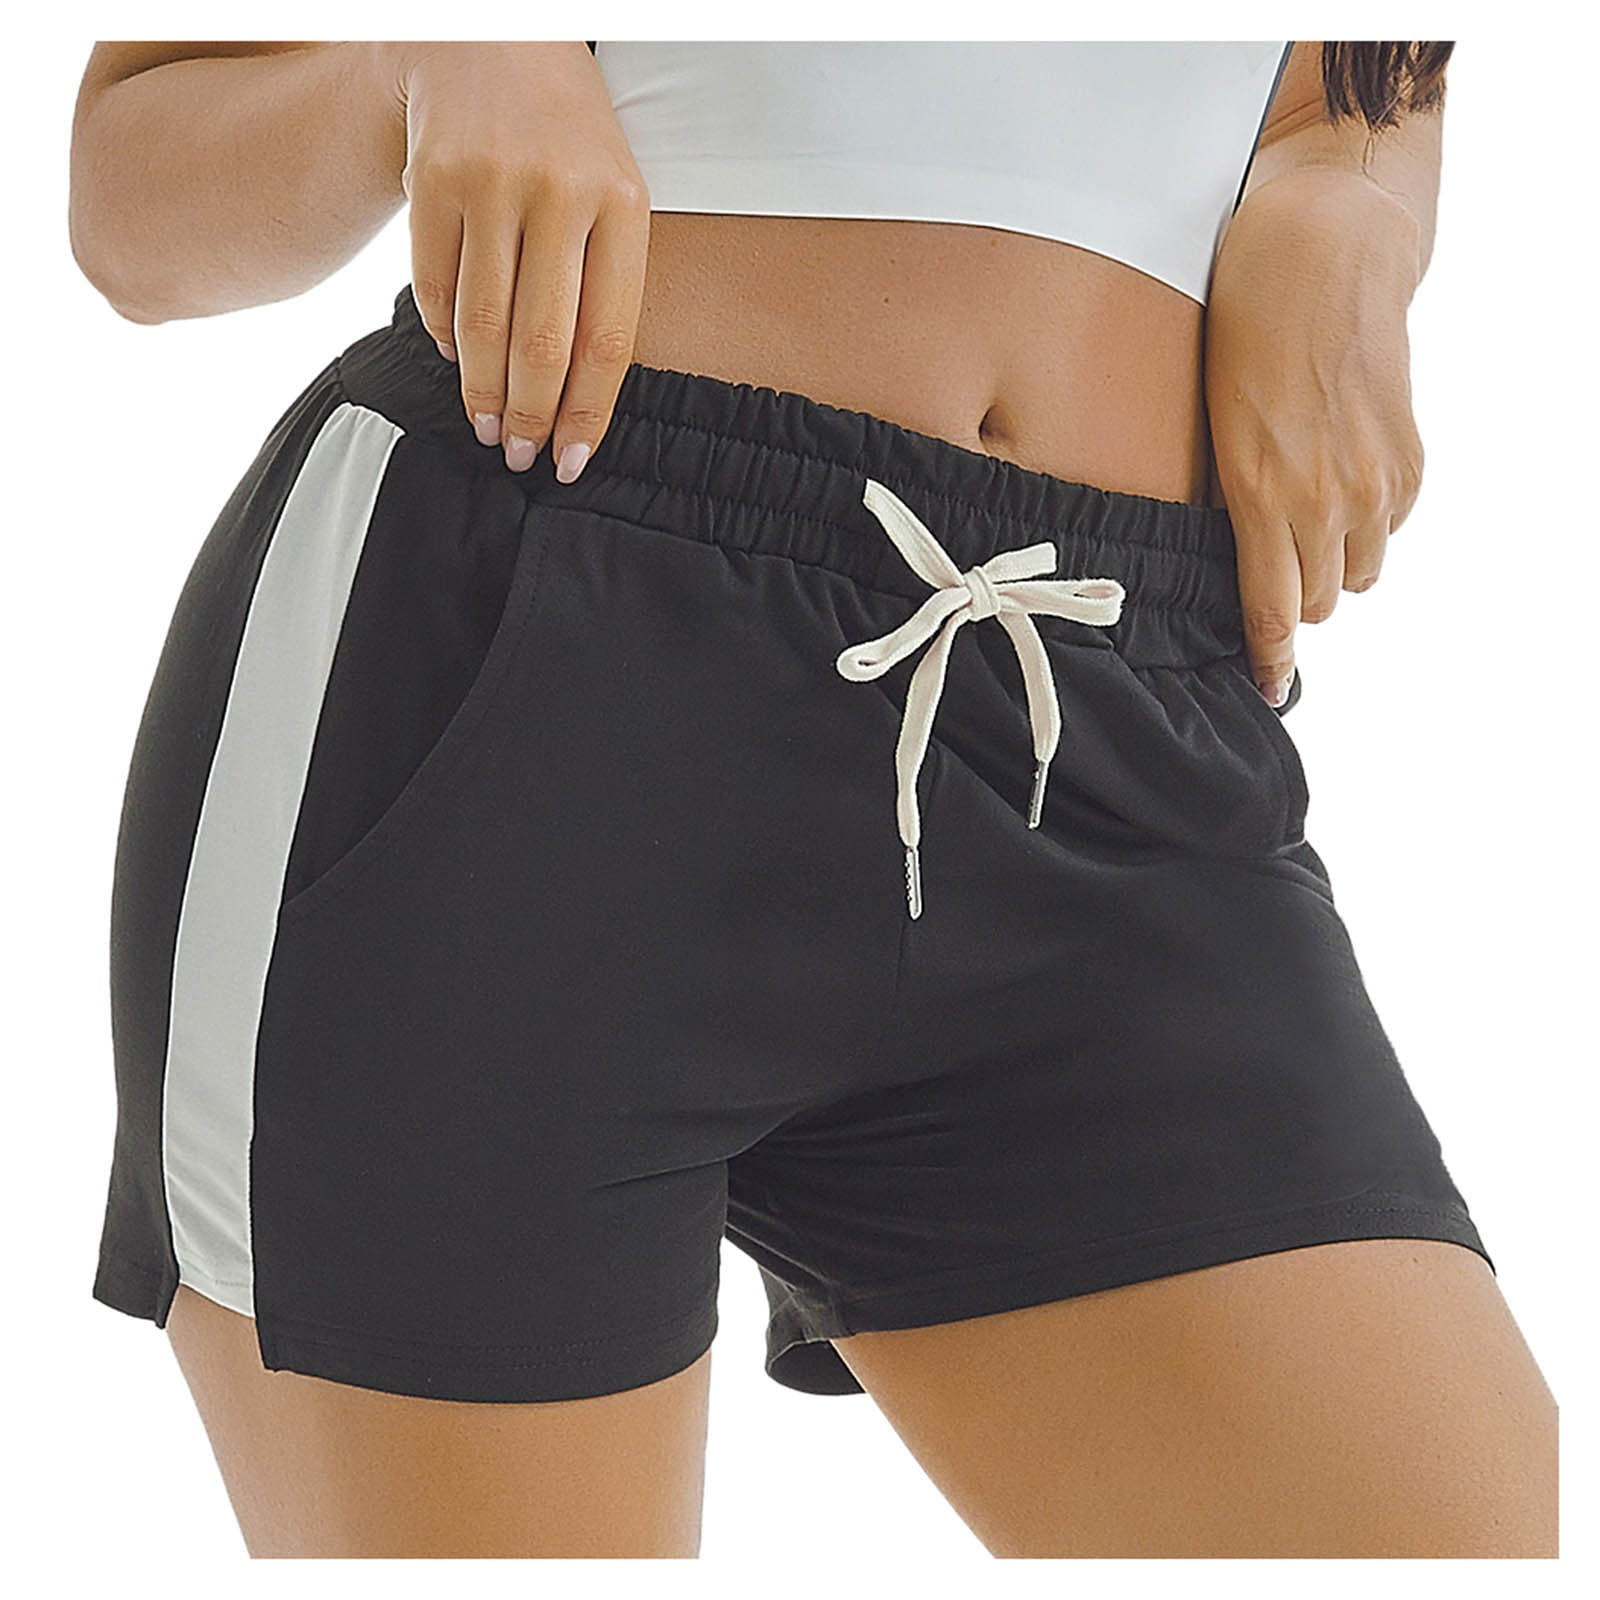 JDEFEG Sweat Shorts Women Stretch Sports Size Leisure Yoga Home Plus Ladies  Shorts Running Pants Running Clothes Dresses for Women Polyester Black Xl